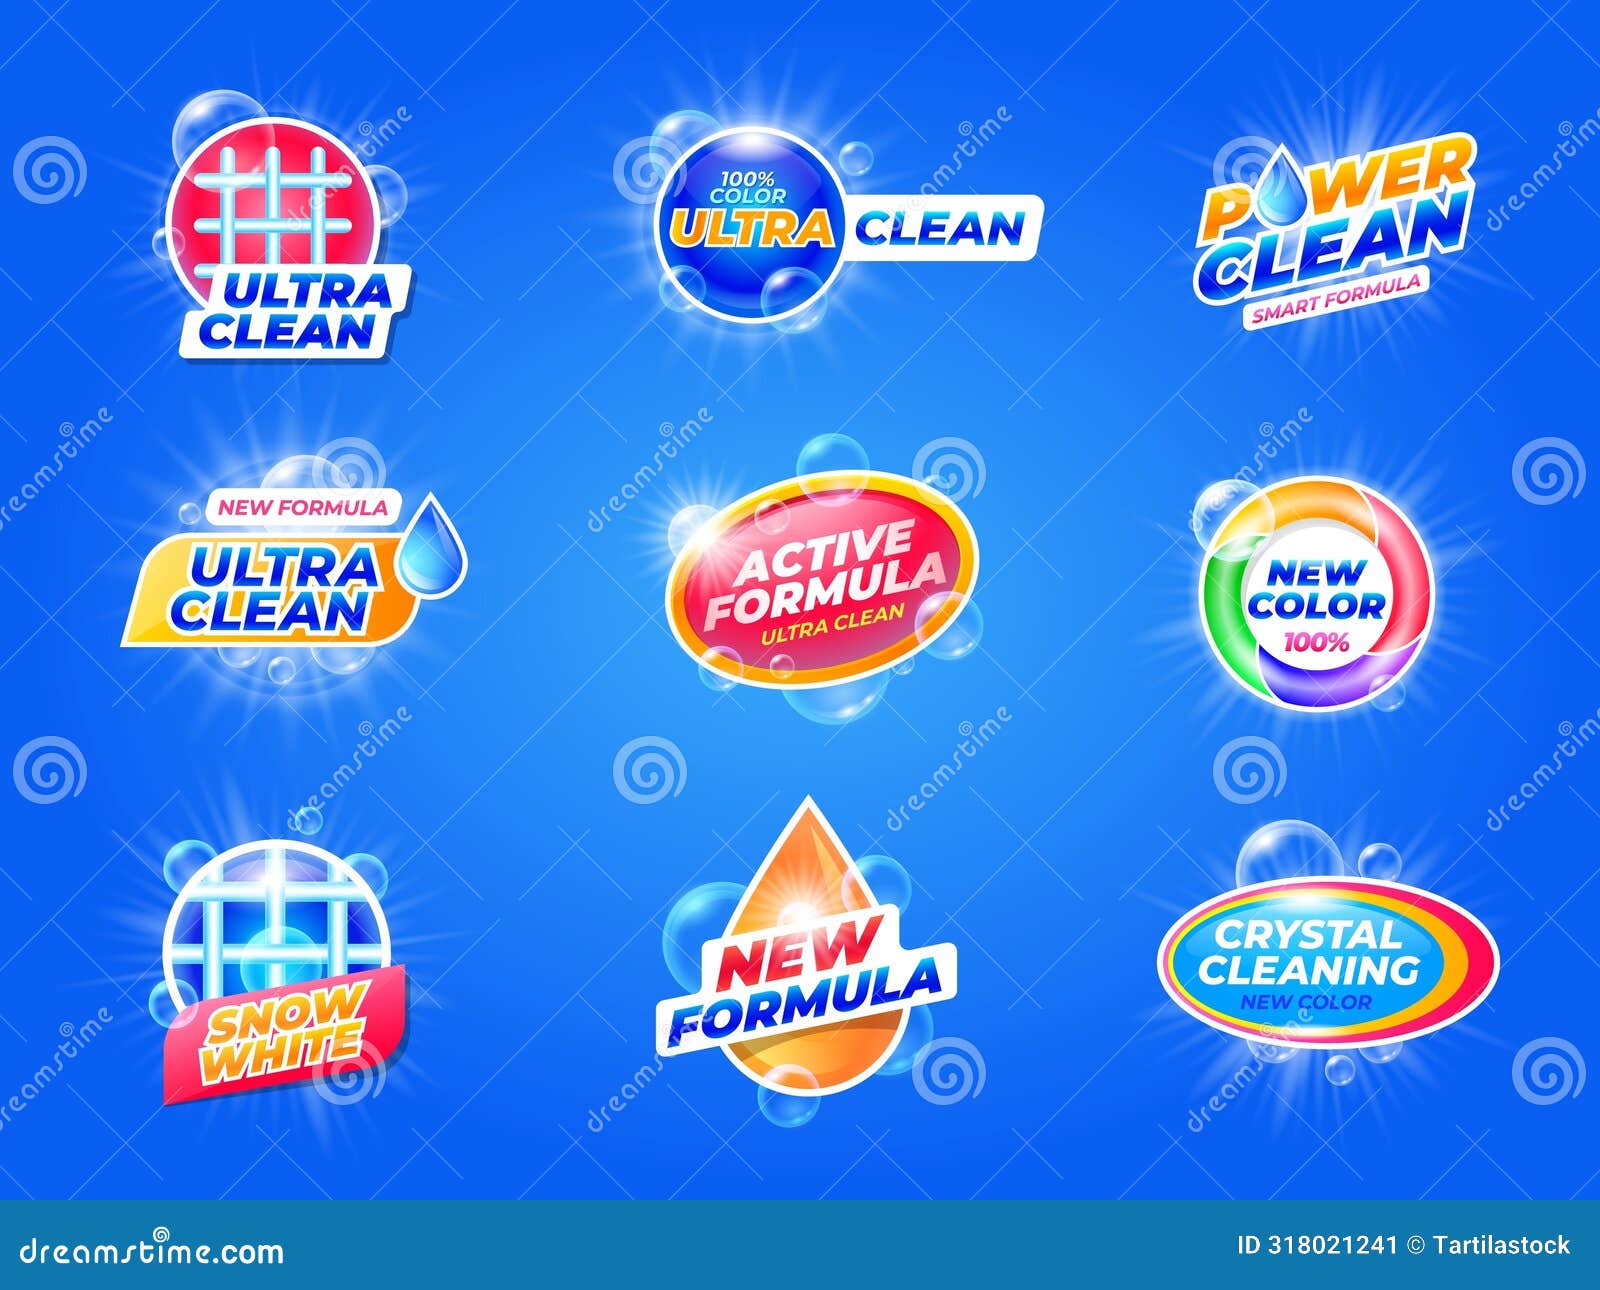 laundry detergent label. washing powder emblem package with bubbles, soap and stain remover, laundry care product with